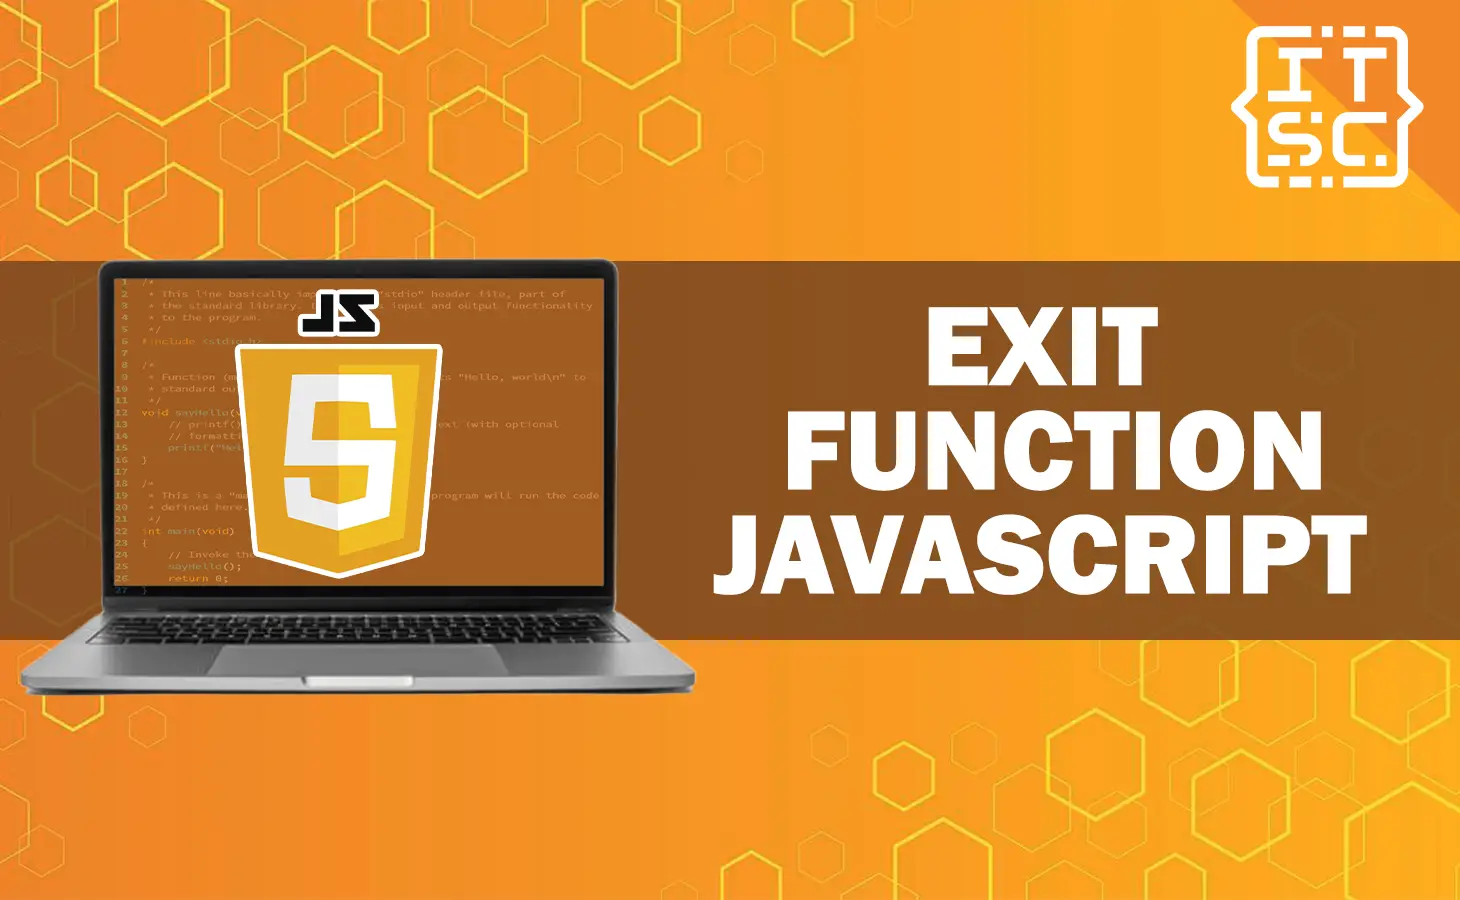 How to exit a function in JavaScript?